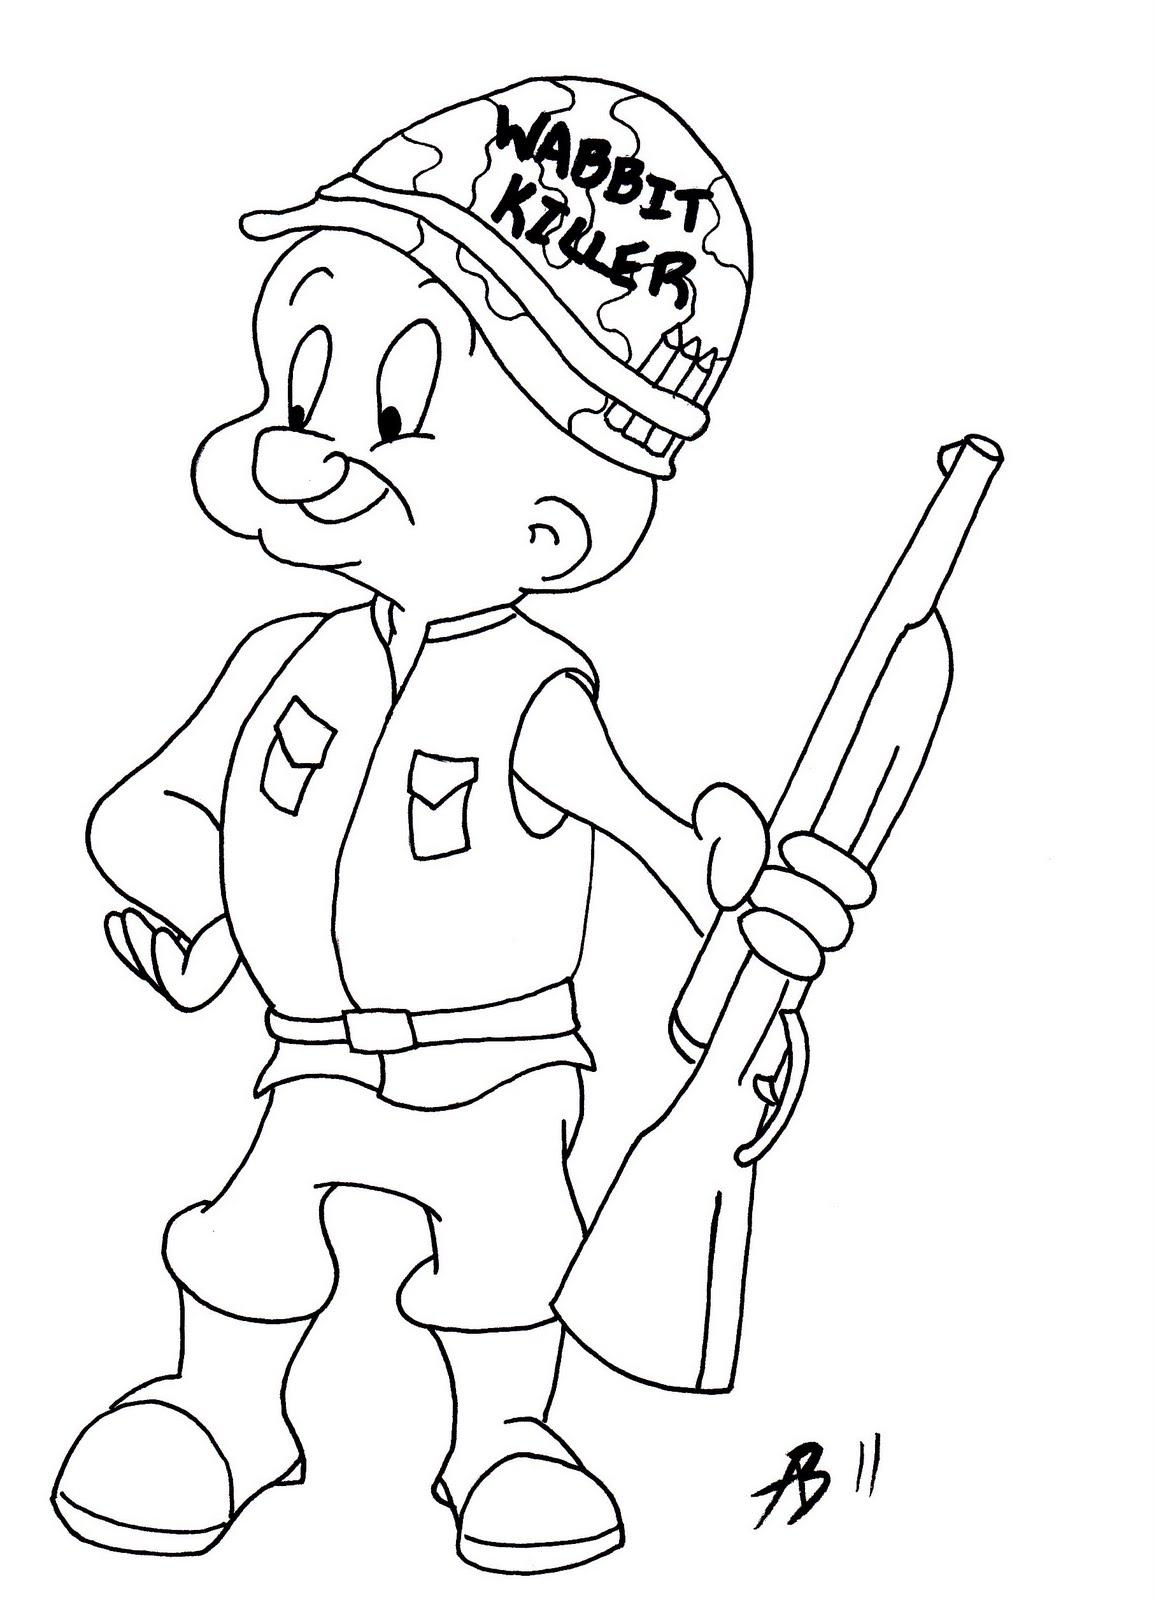 Elmer Fudd Coloring Pages Looney Tunes Elmer Fudd Coloring Pages